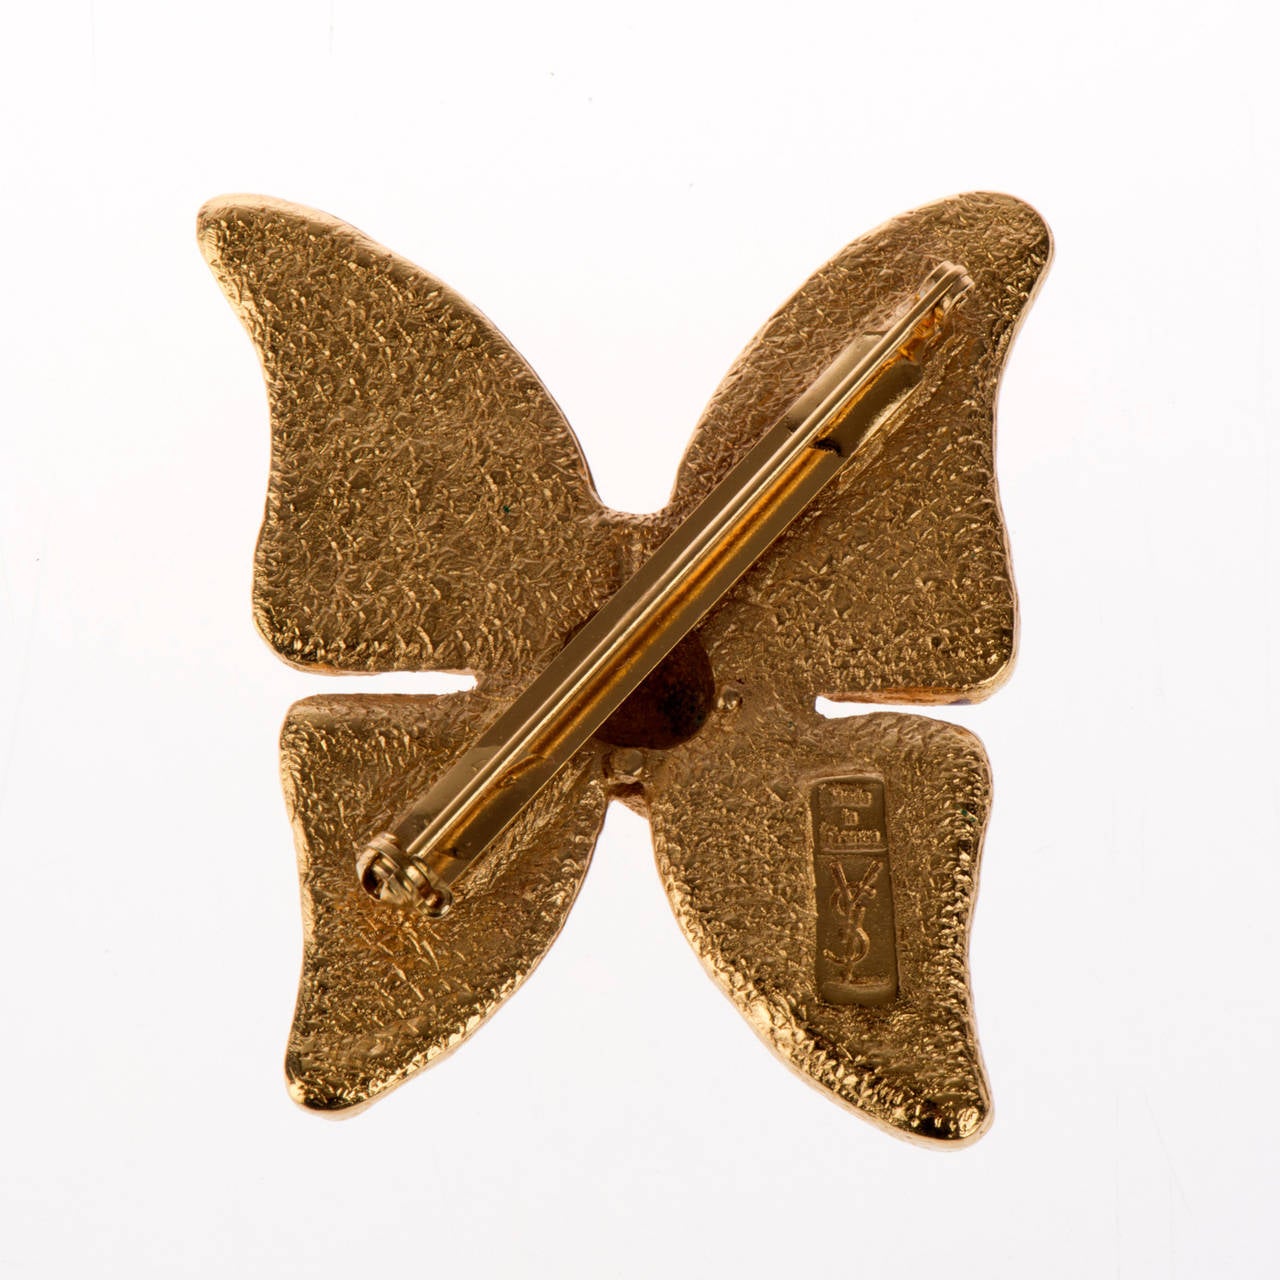 A delightful gilt and enamel 'Butterfly' brooch by Yves Saint Laurent.The Aubergine enamel is almost translucent and together with the textured gilt, makes this brooch a real treasure from this famous Paris Designer.